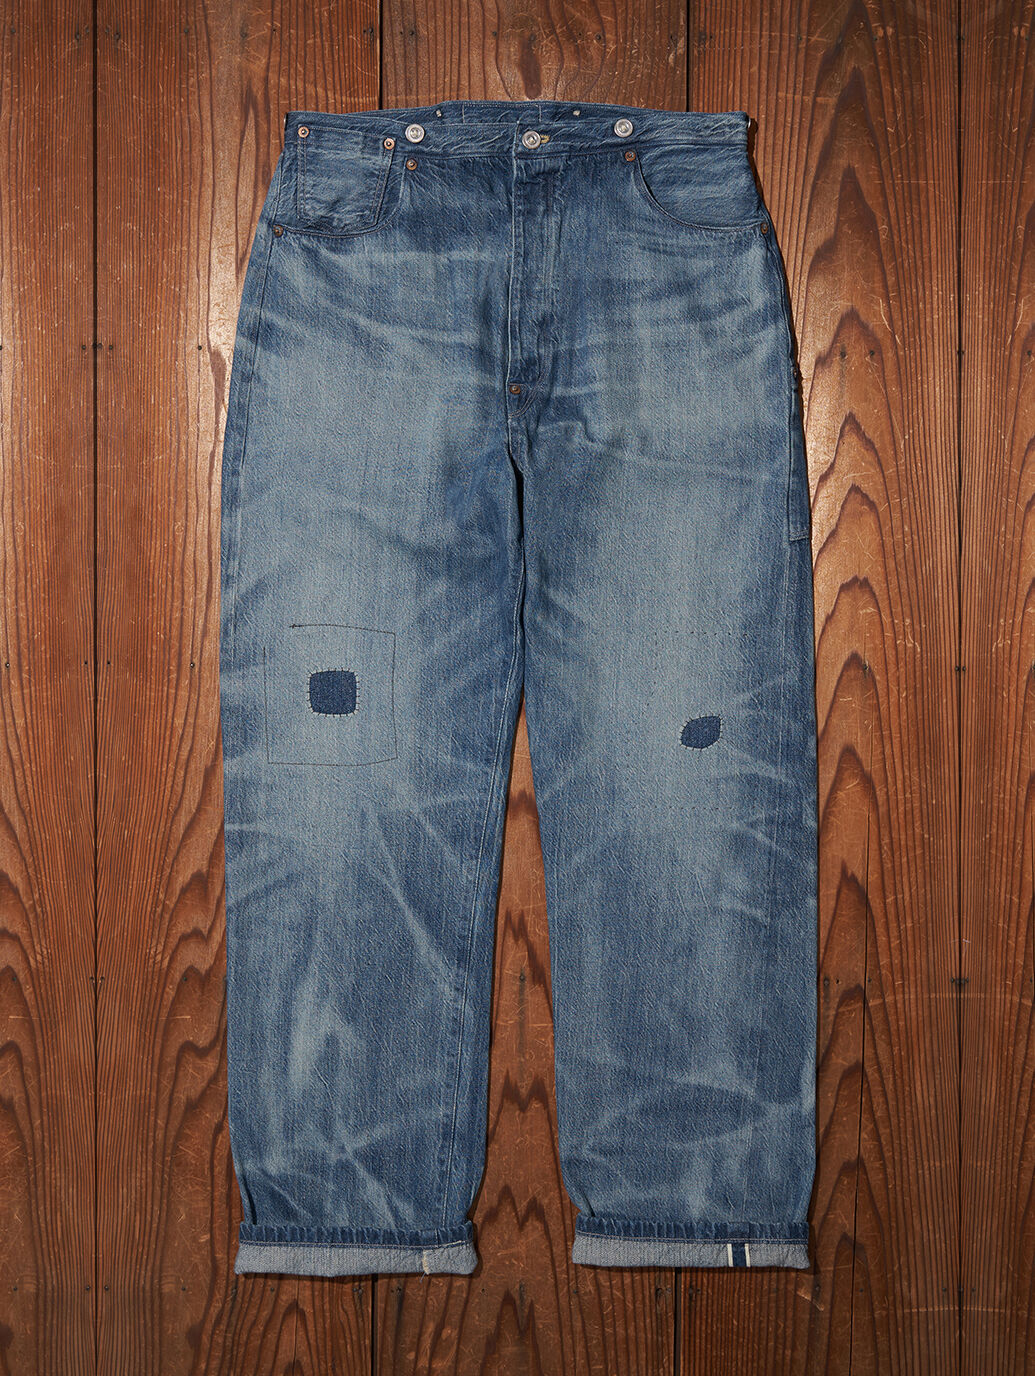 LEVI'S® VINTAGE CLOTHING 1870'S NEVADA OVRALL SIERRA インディゴ